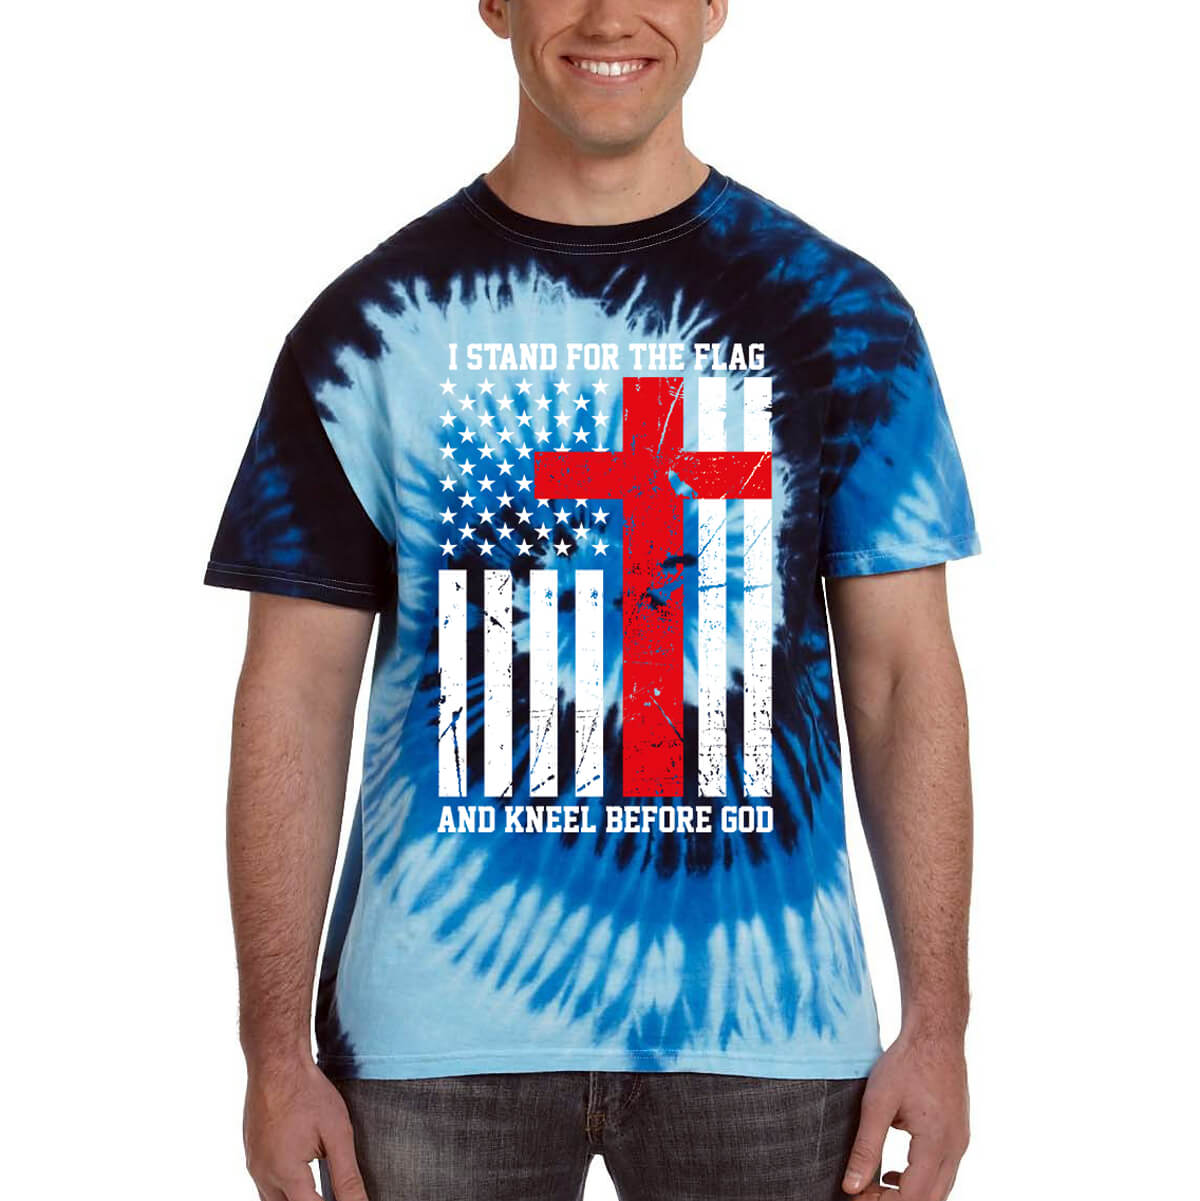 I Stand For The Flag And Kneel Before God Tie Dyed Men's T-Shirt